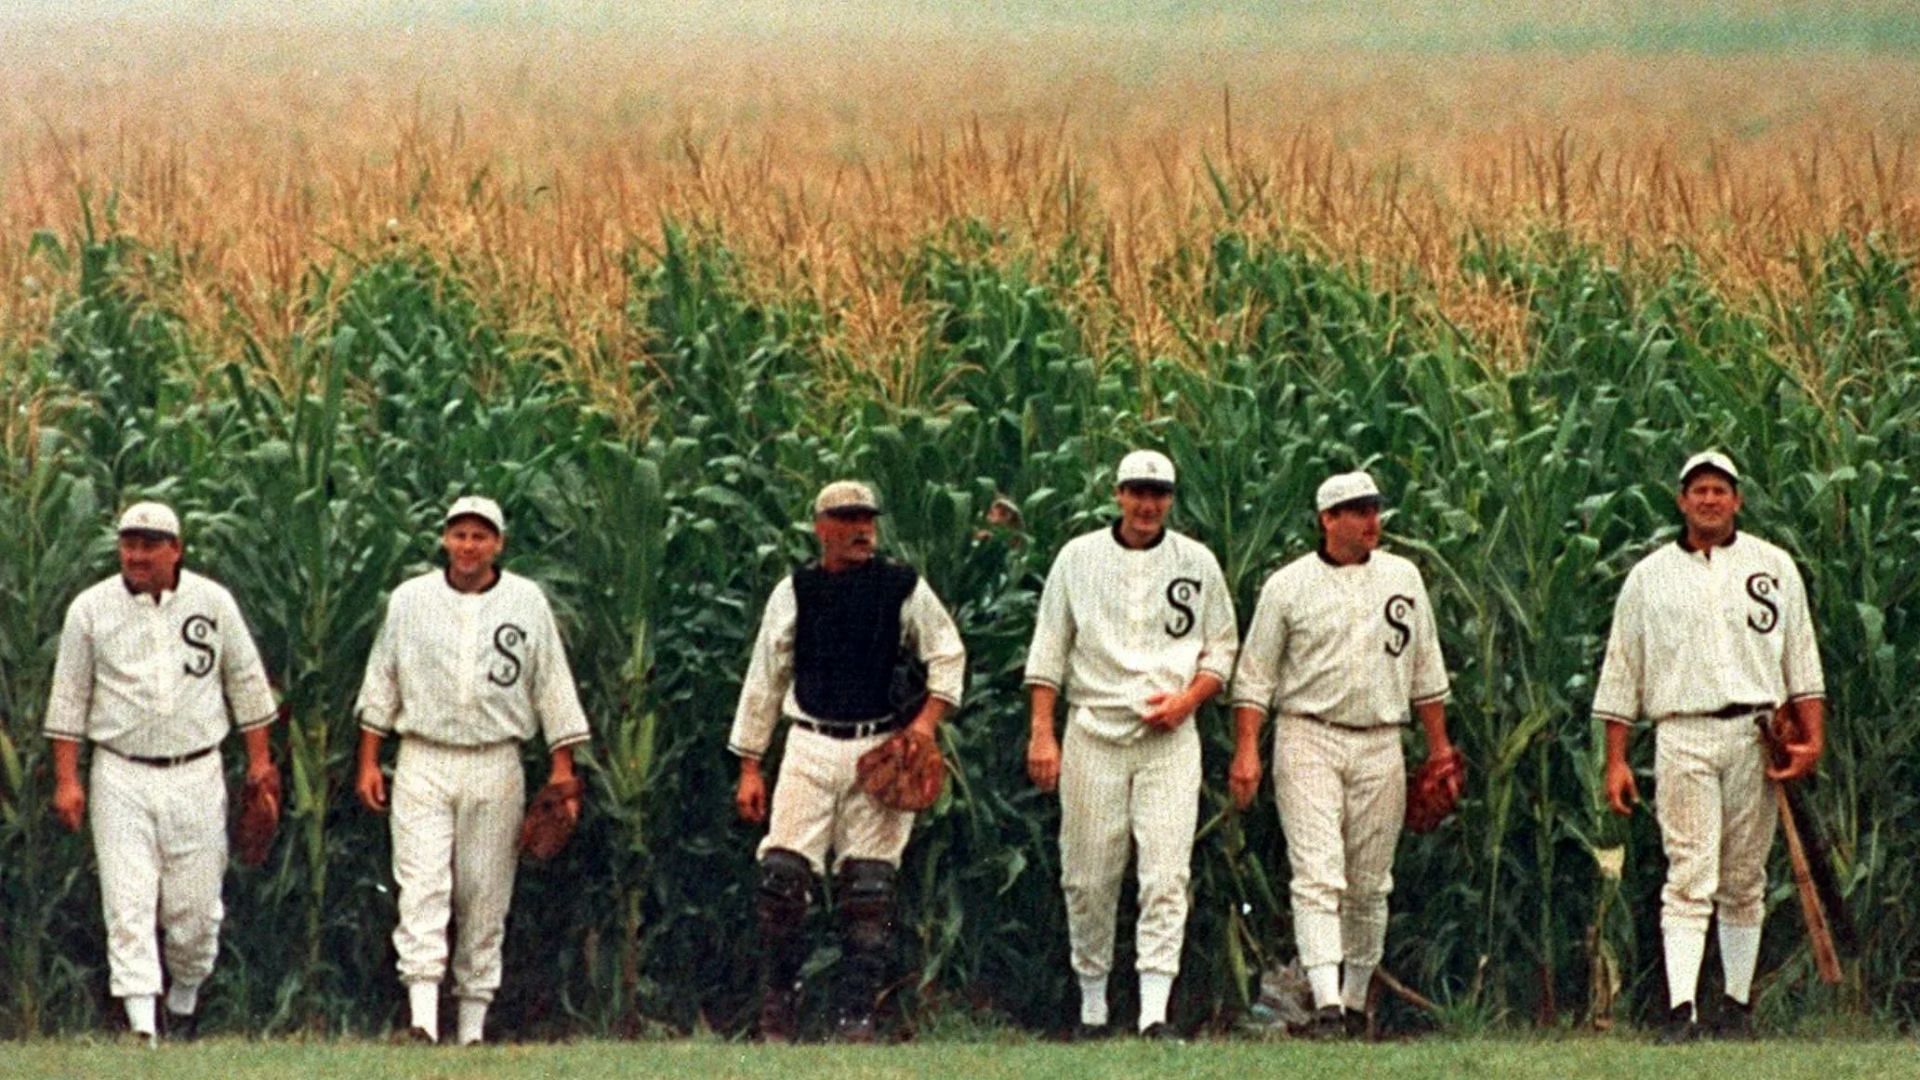 If you ever get the chance to experience Field of Dreams, it truly